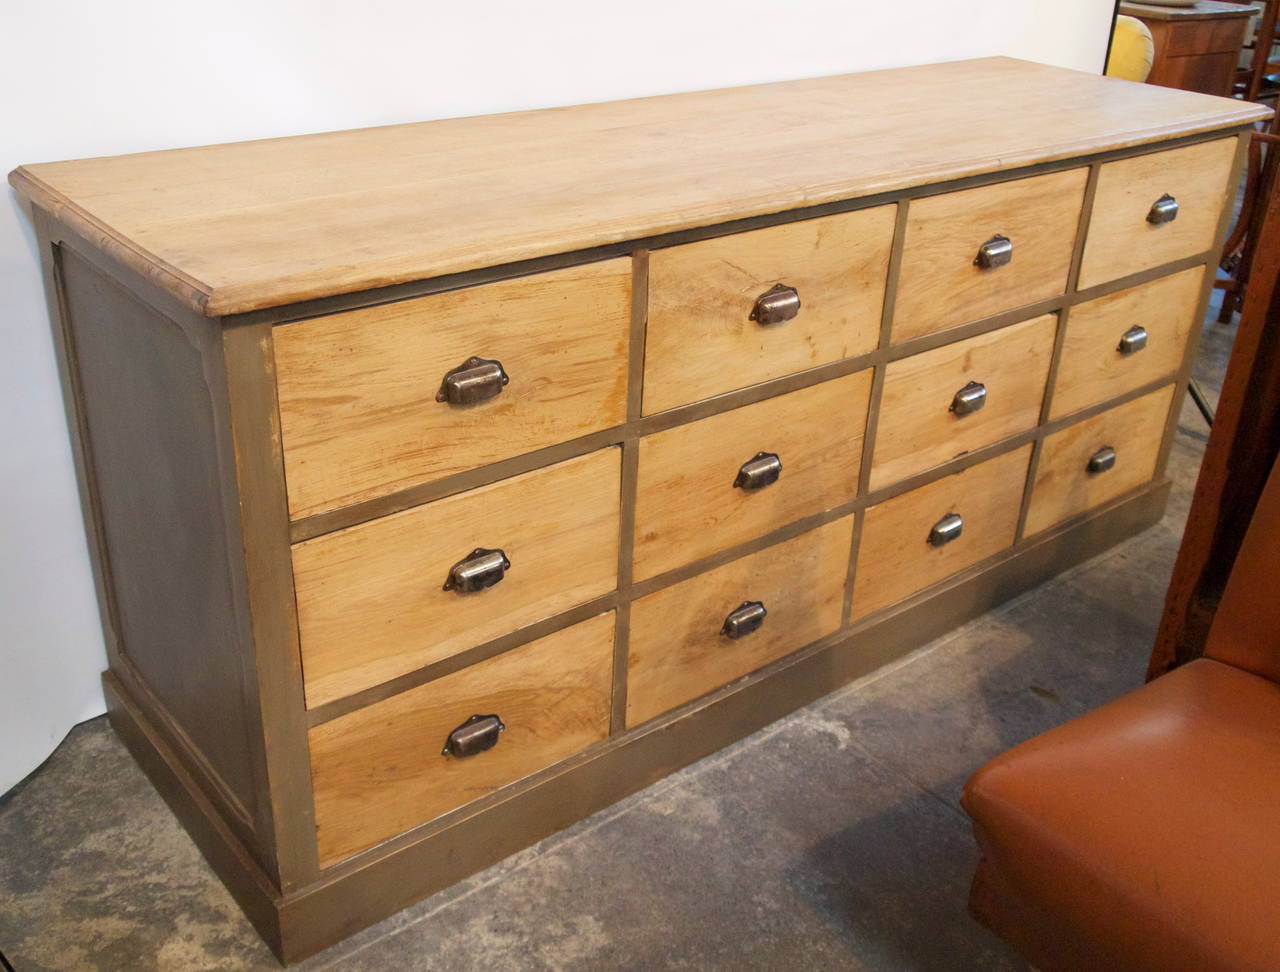 Handsome and well proportioned mellow oak wood and grey painted 12 drawer French merchants counter with original hardware pulls